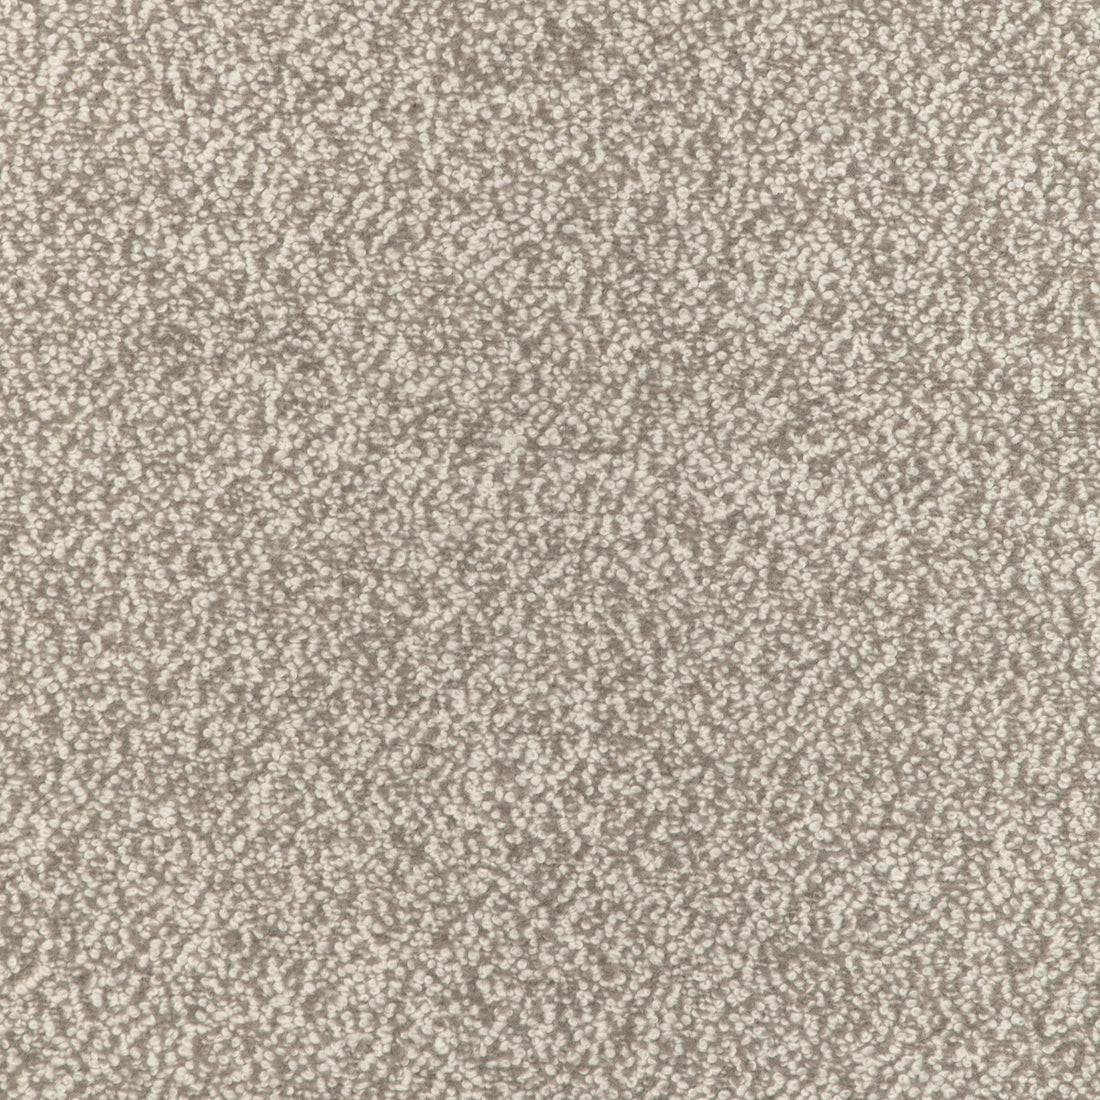 Alpaca Boucle fabric in fawn color - pattern 36898.6.0 - by Kravet Couture in the Atelier Weaves collection